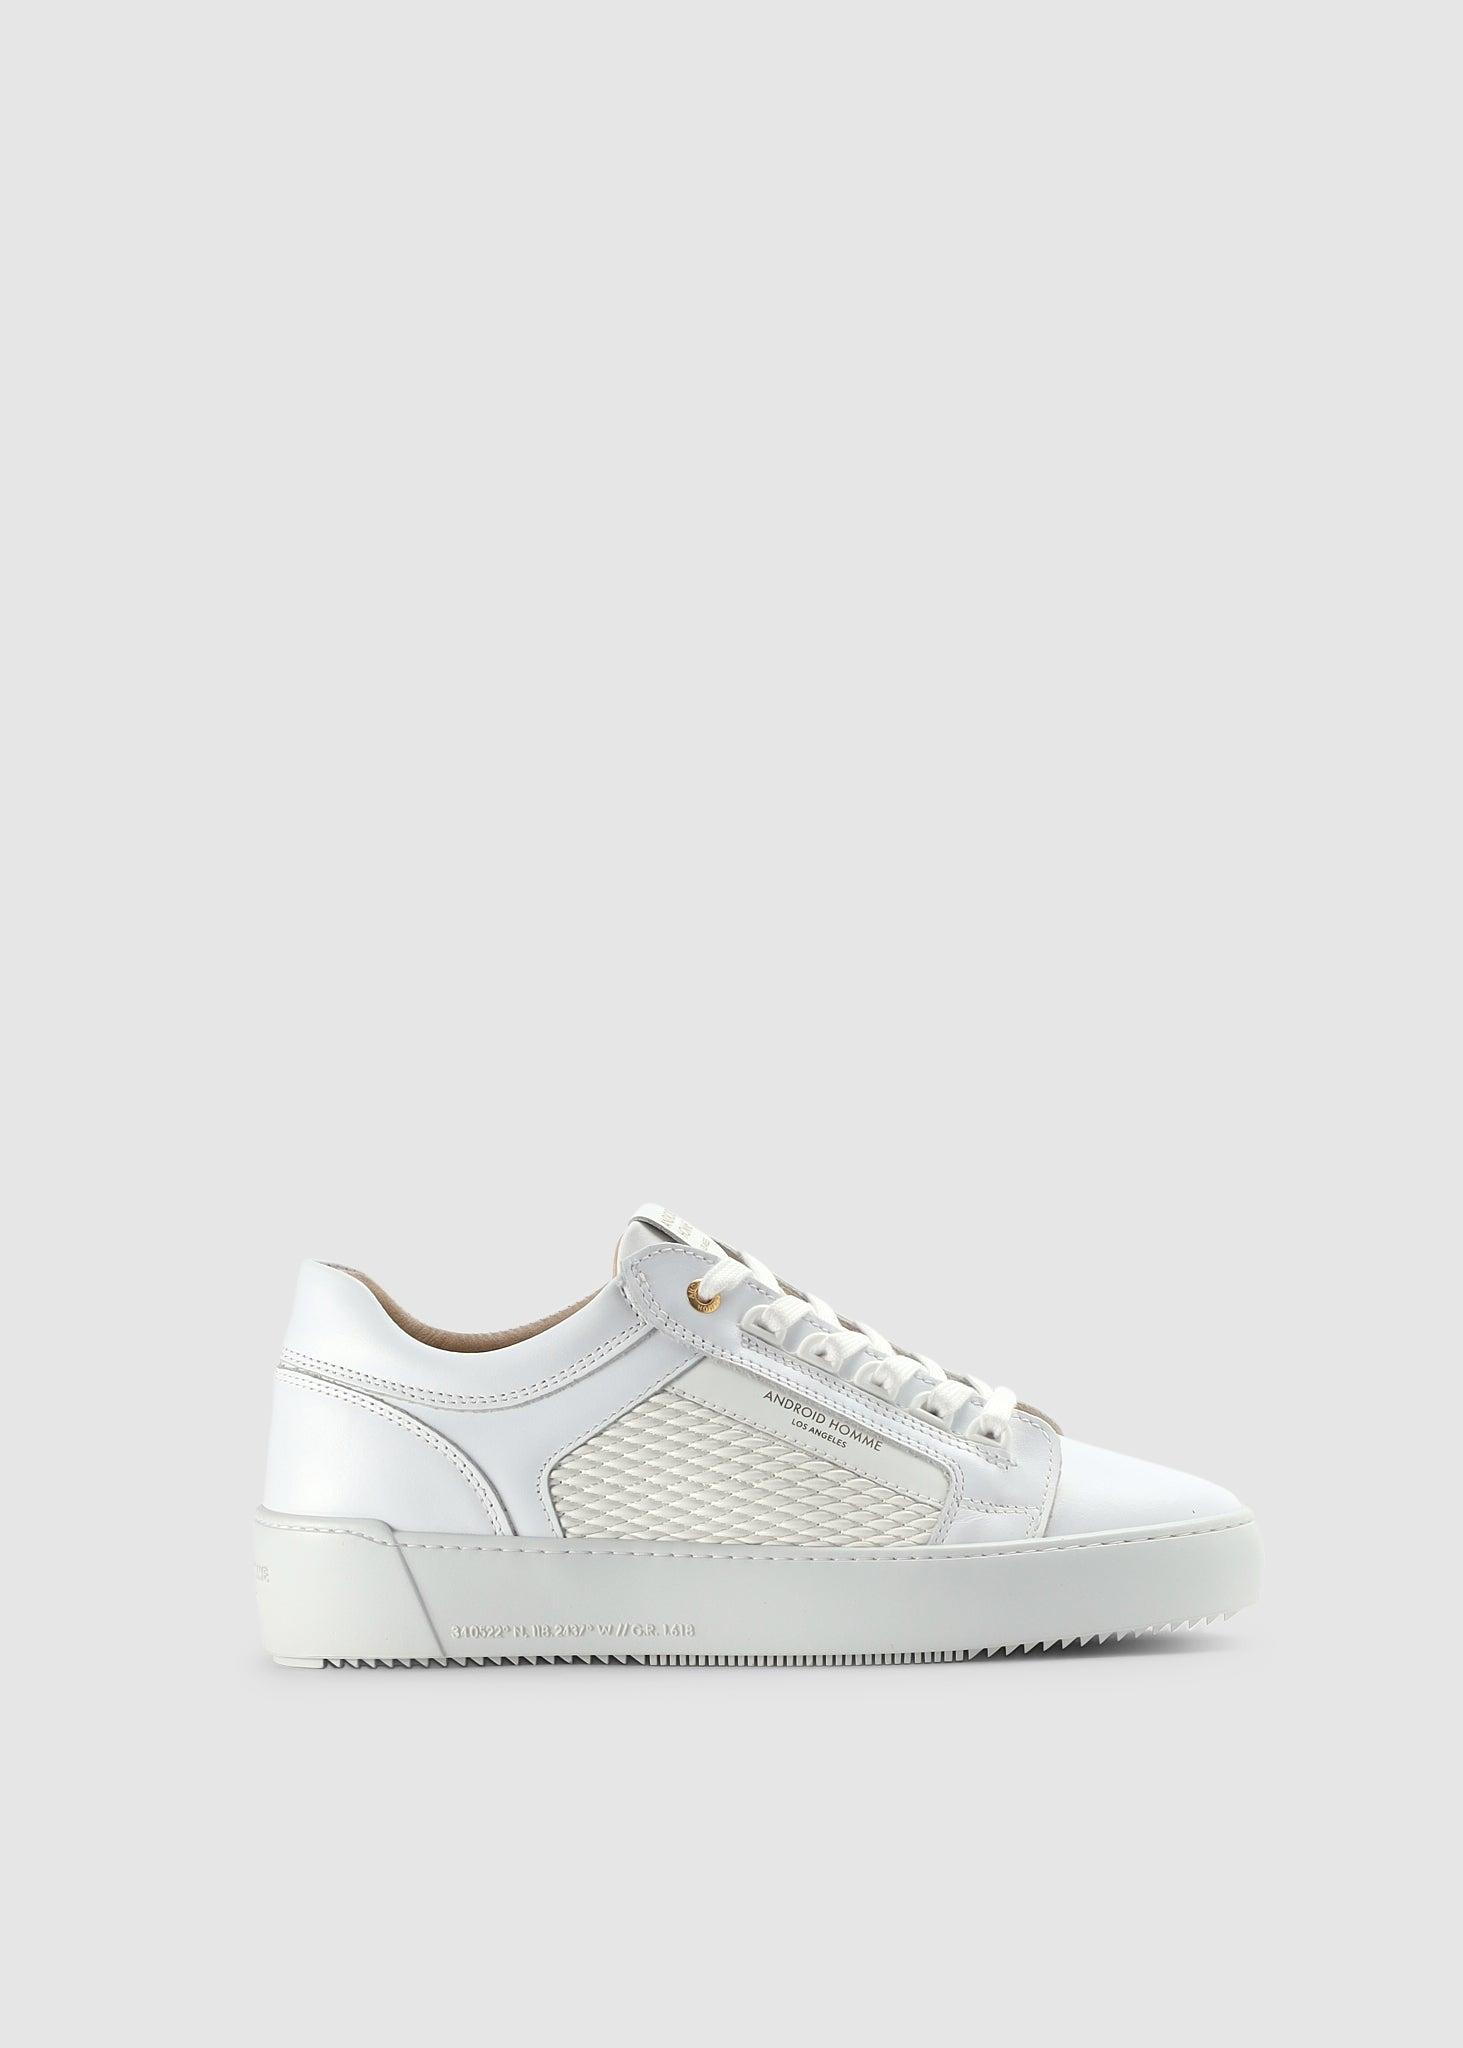 Android Homme Venice Stretch Woven Trainers in White for Men | Lyst